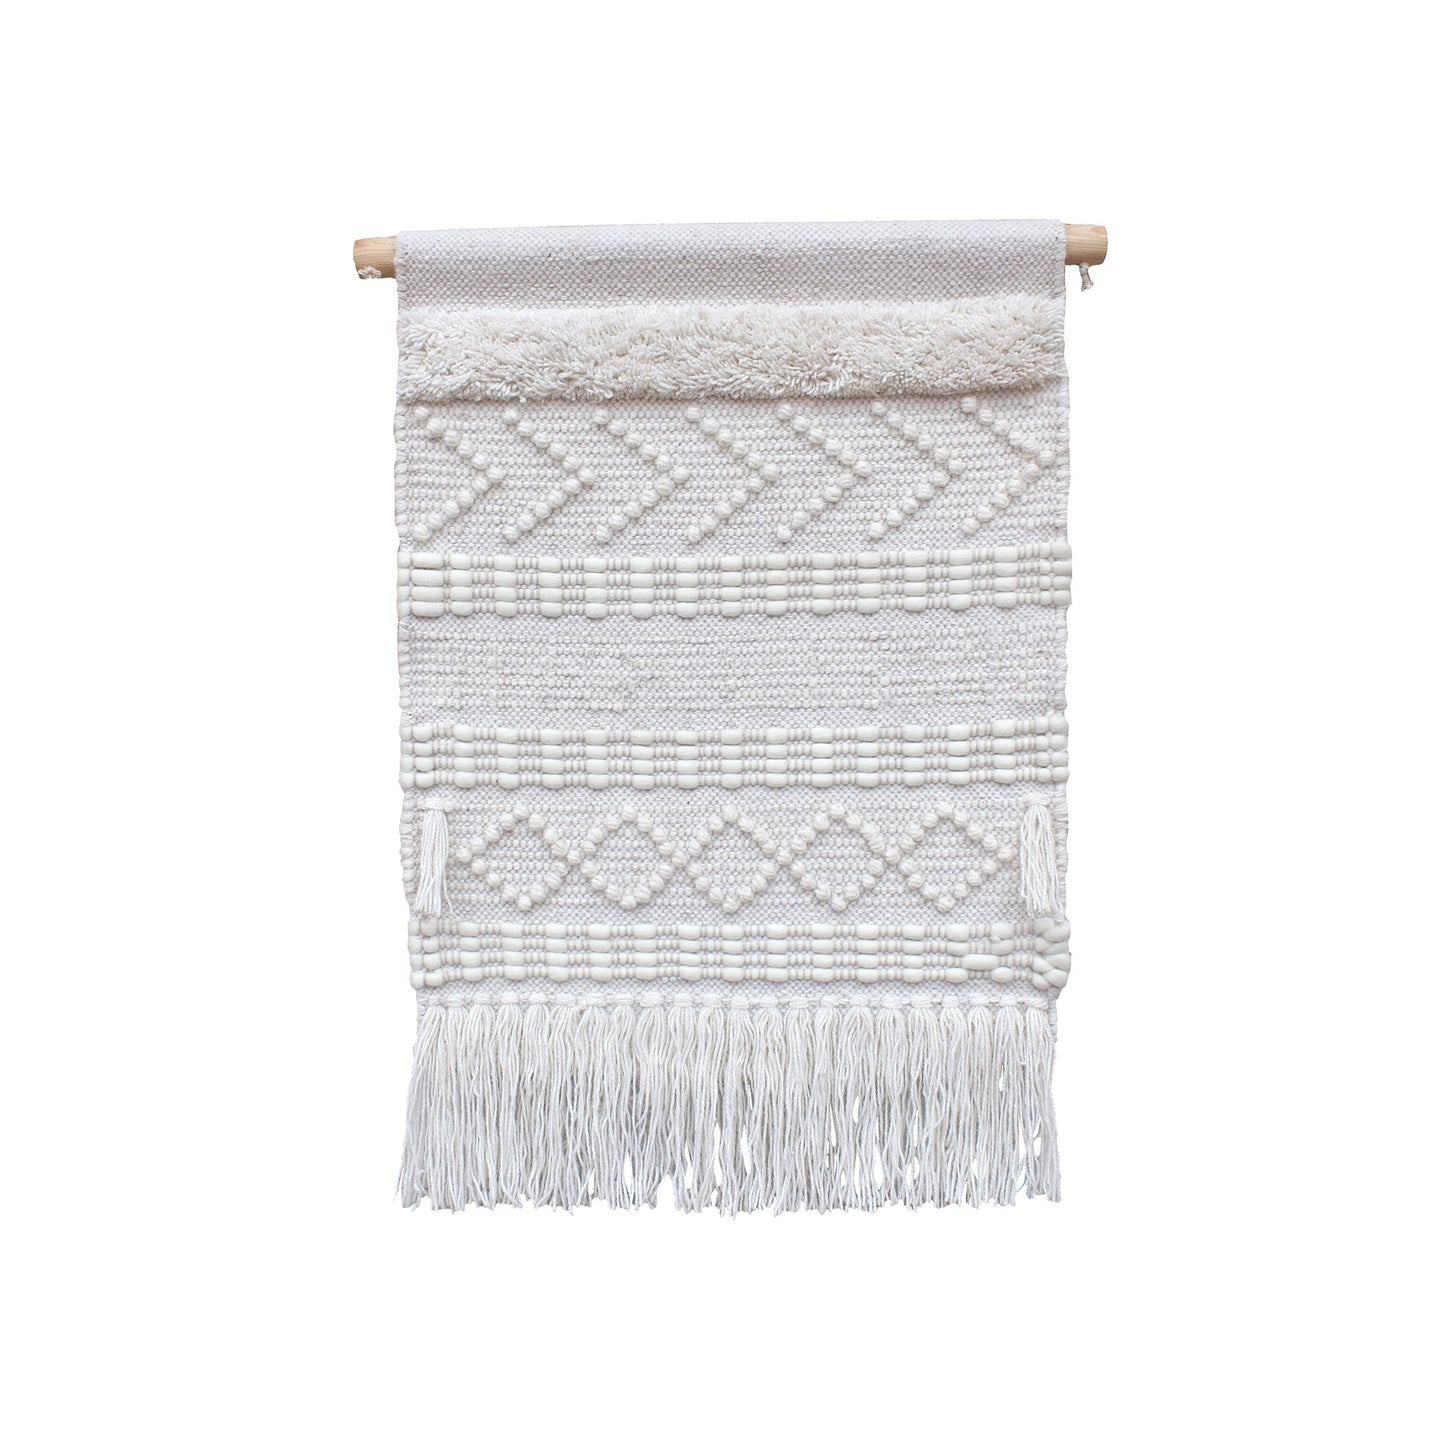 PAOLO WALL HANGING - WOOL